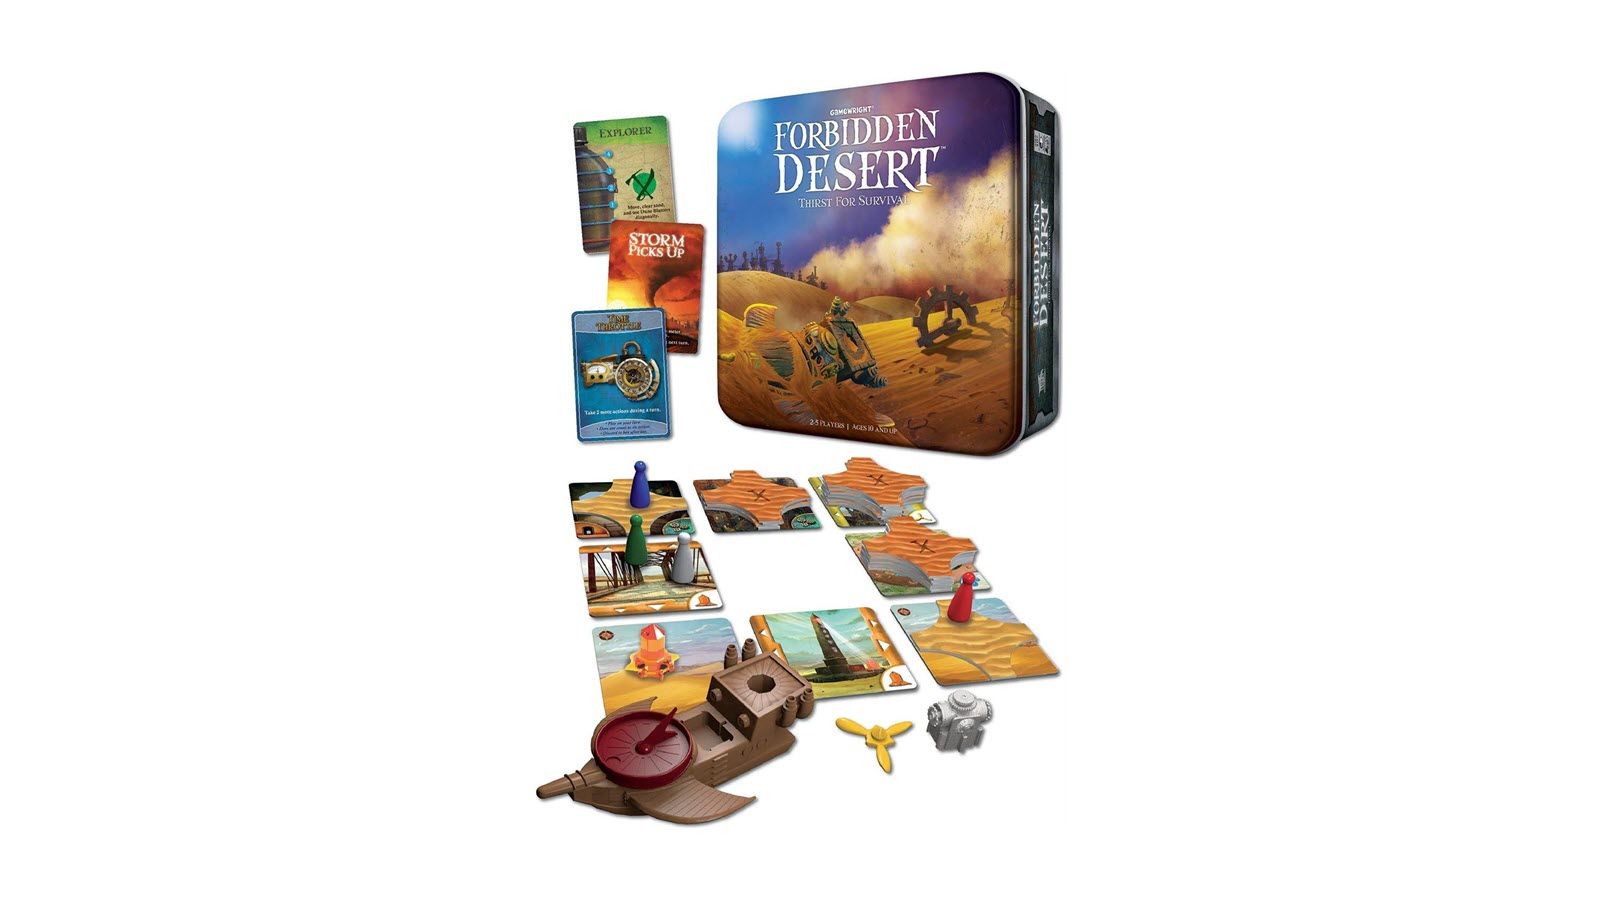 The Forbidden Desert game box and board featuring a solar-powered aircraft.